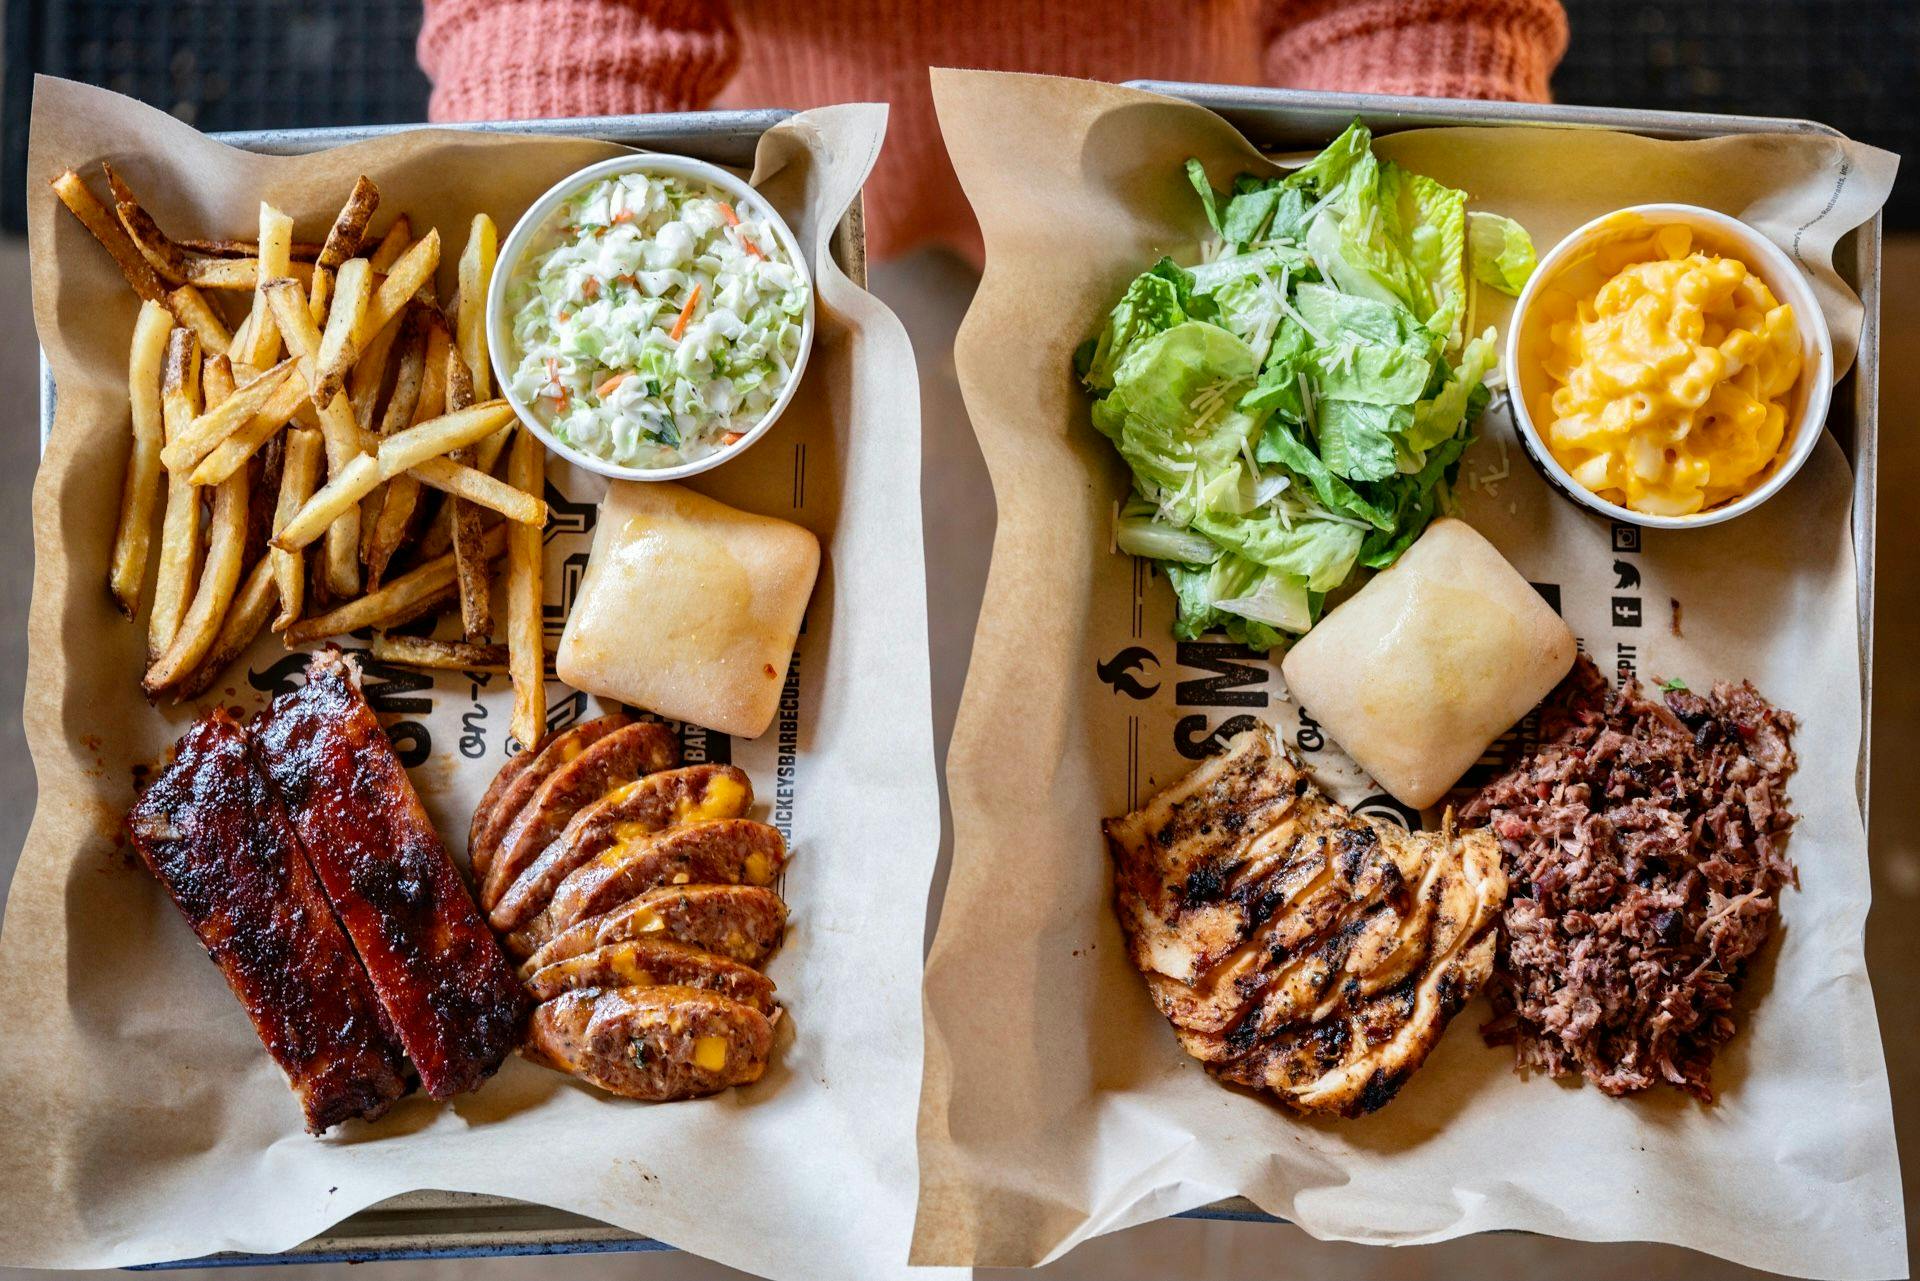 Summer Has Arrived at Dickey’s Barbecue Pit Texas-style barbecue restaurant celebrates with debut of seasonal specials like free delivery and new King’s Hawaiian® Pulled Pork Sandwich with Dr Pepper Barbecue Sauce